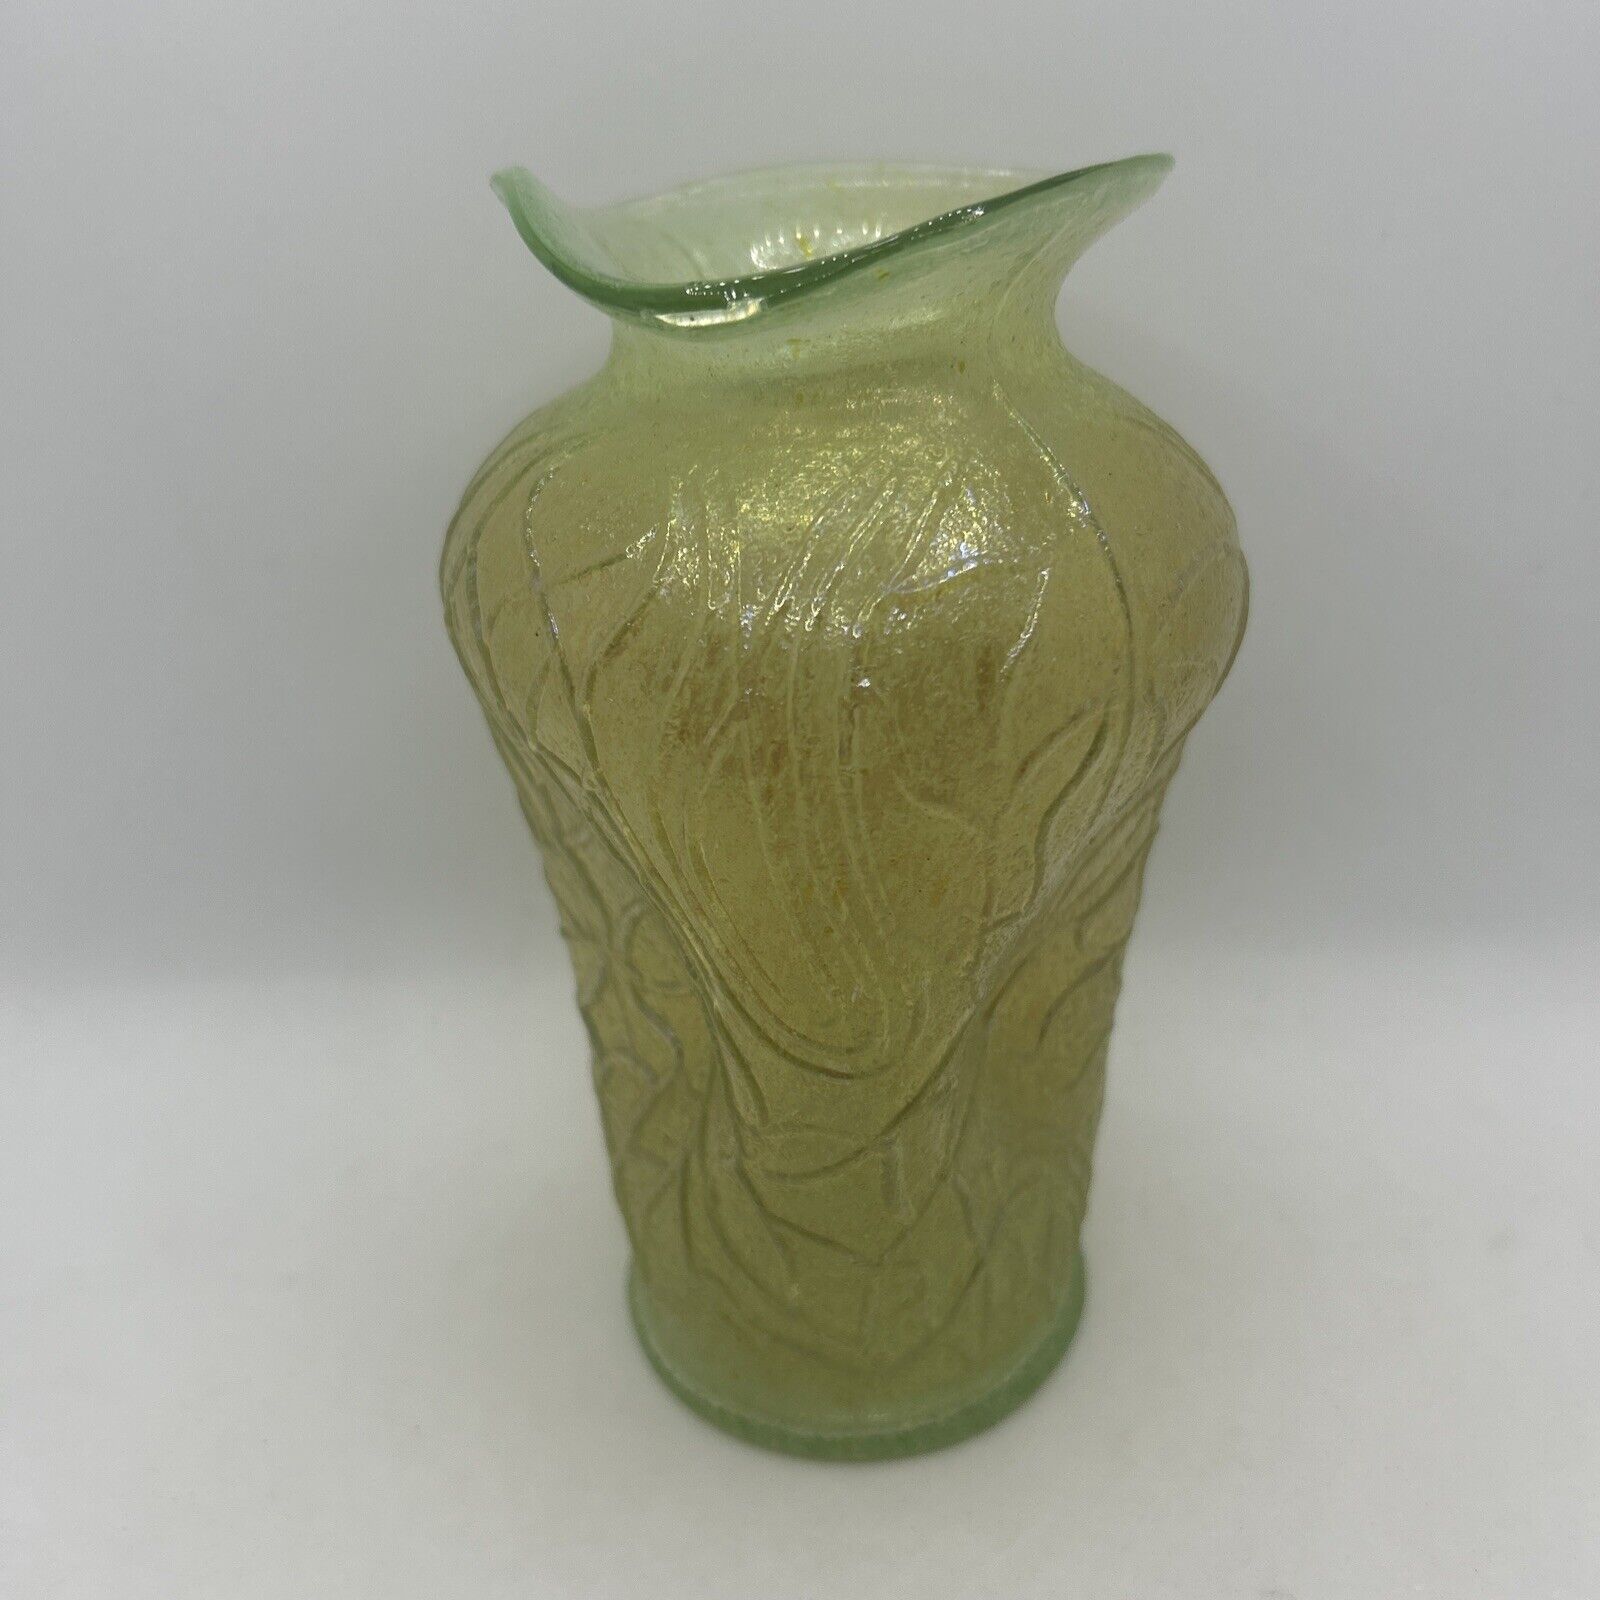 Beautiful Antique Stipple Dugan’s Green/Gold Pinched Vase 5.75” tall